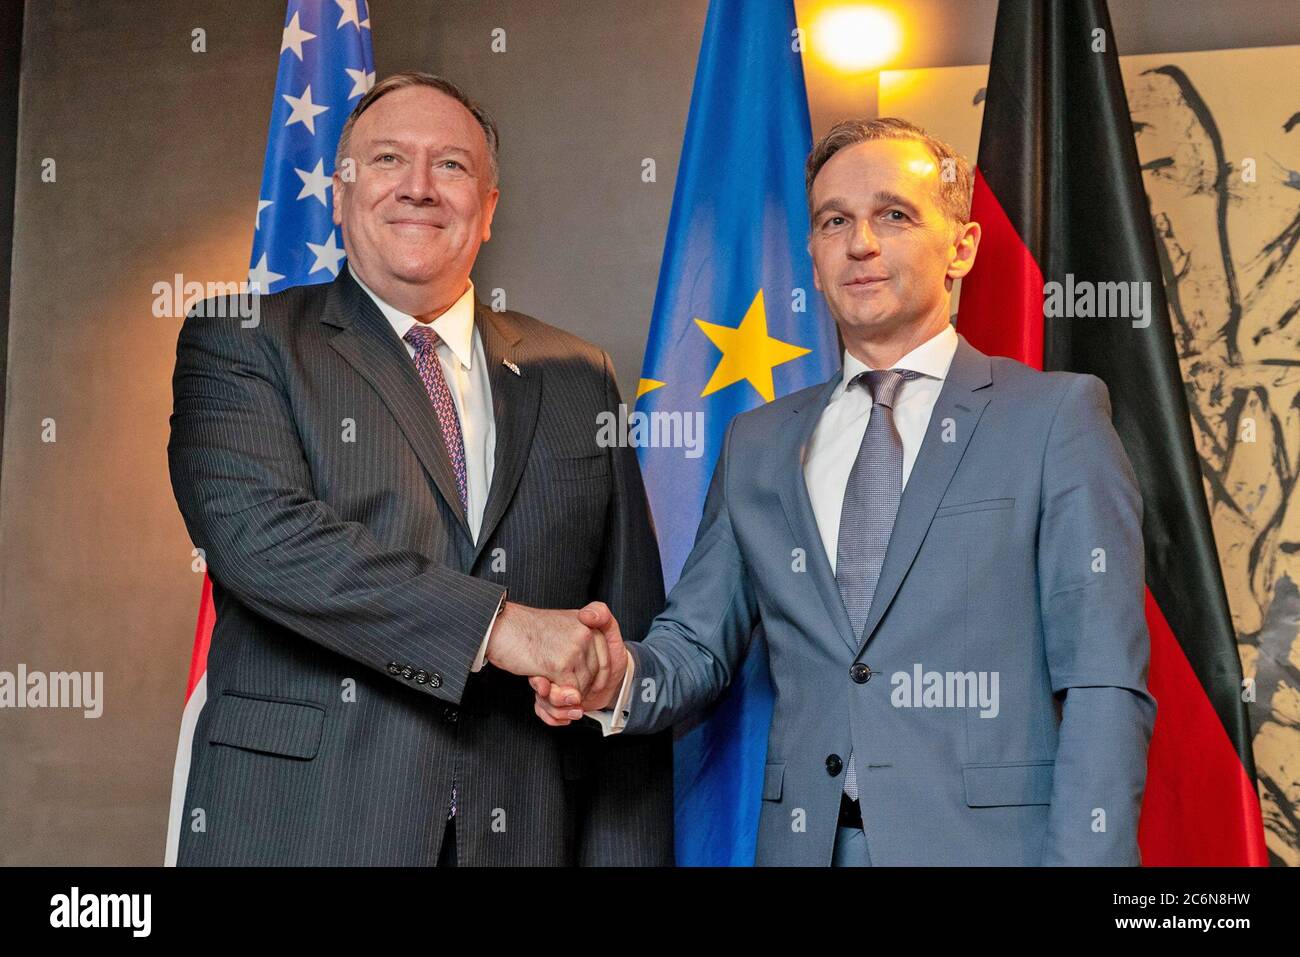 U.S. Secretary of State Michael R. Pompeo meets with German Foreign Minister Heiko Maas in Munich, Germany, on February 14, 2020 Stock Photo